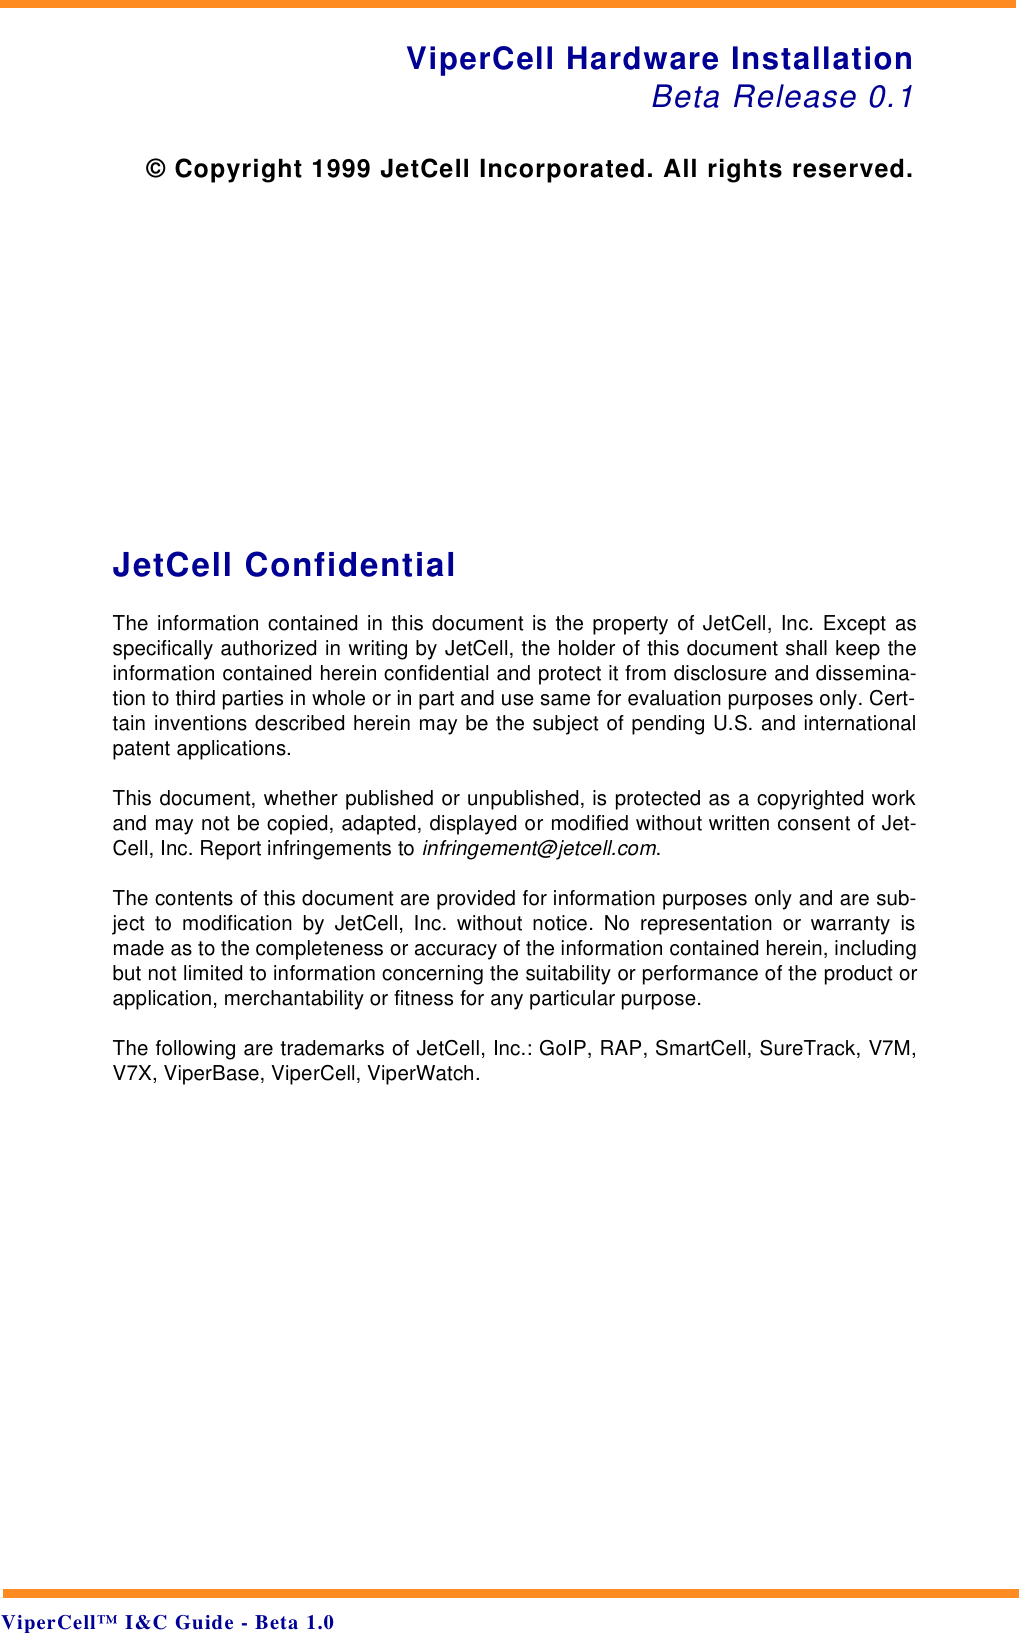 ViperCell™ I&amp;C Guide - Beta 1.0JetCell ConfidentialThe information contained in this document is the property of JetCell, Inc. Except asspecifically authorized in writing by JetCell, the holder of this document shall keep theinformation contained herein confidential and protect it from disclosure and dissemina-tion to third parties in whole or in part and use same for evaluation purposes only. Cert-tain inventions described herein may be the subject of pending U.S. and internationalpatent applications.This document, whether published or unpublished, is protected as a copyrighted workand may not be copied, adapted, displayed or modified without written consent of Jet-Cell, Inc. Report infringements to infringement@jetcell.com.The contents of this document are provided for information purposes only and are sub-ject to modification by JetCell, Inc. without notice. No representation or warranty ismade as to the completeness or accuracy of the information contained herein, includingbut not limited to information concerning the suitability or performance of the product orapplication, merchantability or fitness for any particular purpose.The following are trademarks of JetCell, Inc.: GoIP, RAP, SmartCell, SureTrack, V7M,V7X, ViperBase, ViperCell, ViperWatch.ViperCell Hardware InstallationBeta Release 0.1© Copyright 1999 JetCell Incorporated. All rights reserved.